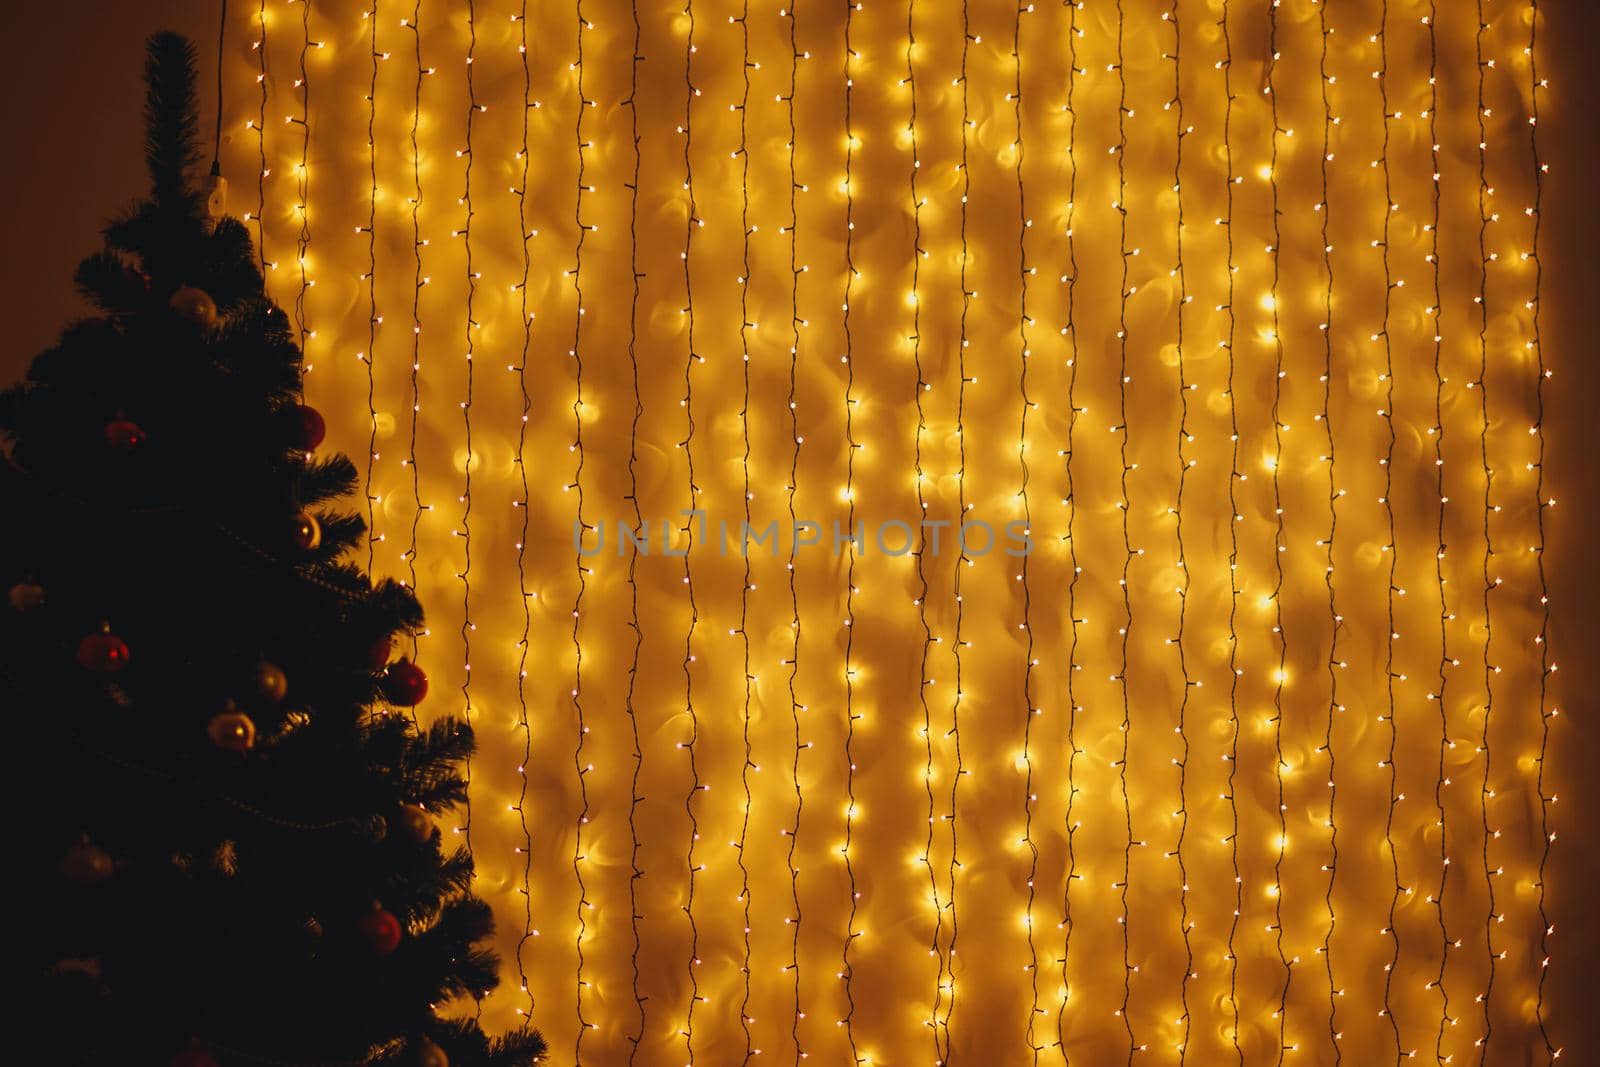 Lighted Christmas garland hanging on the wall by deandy